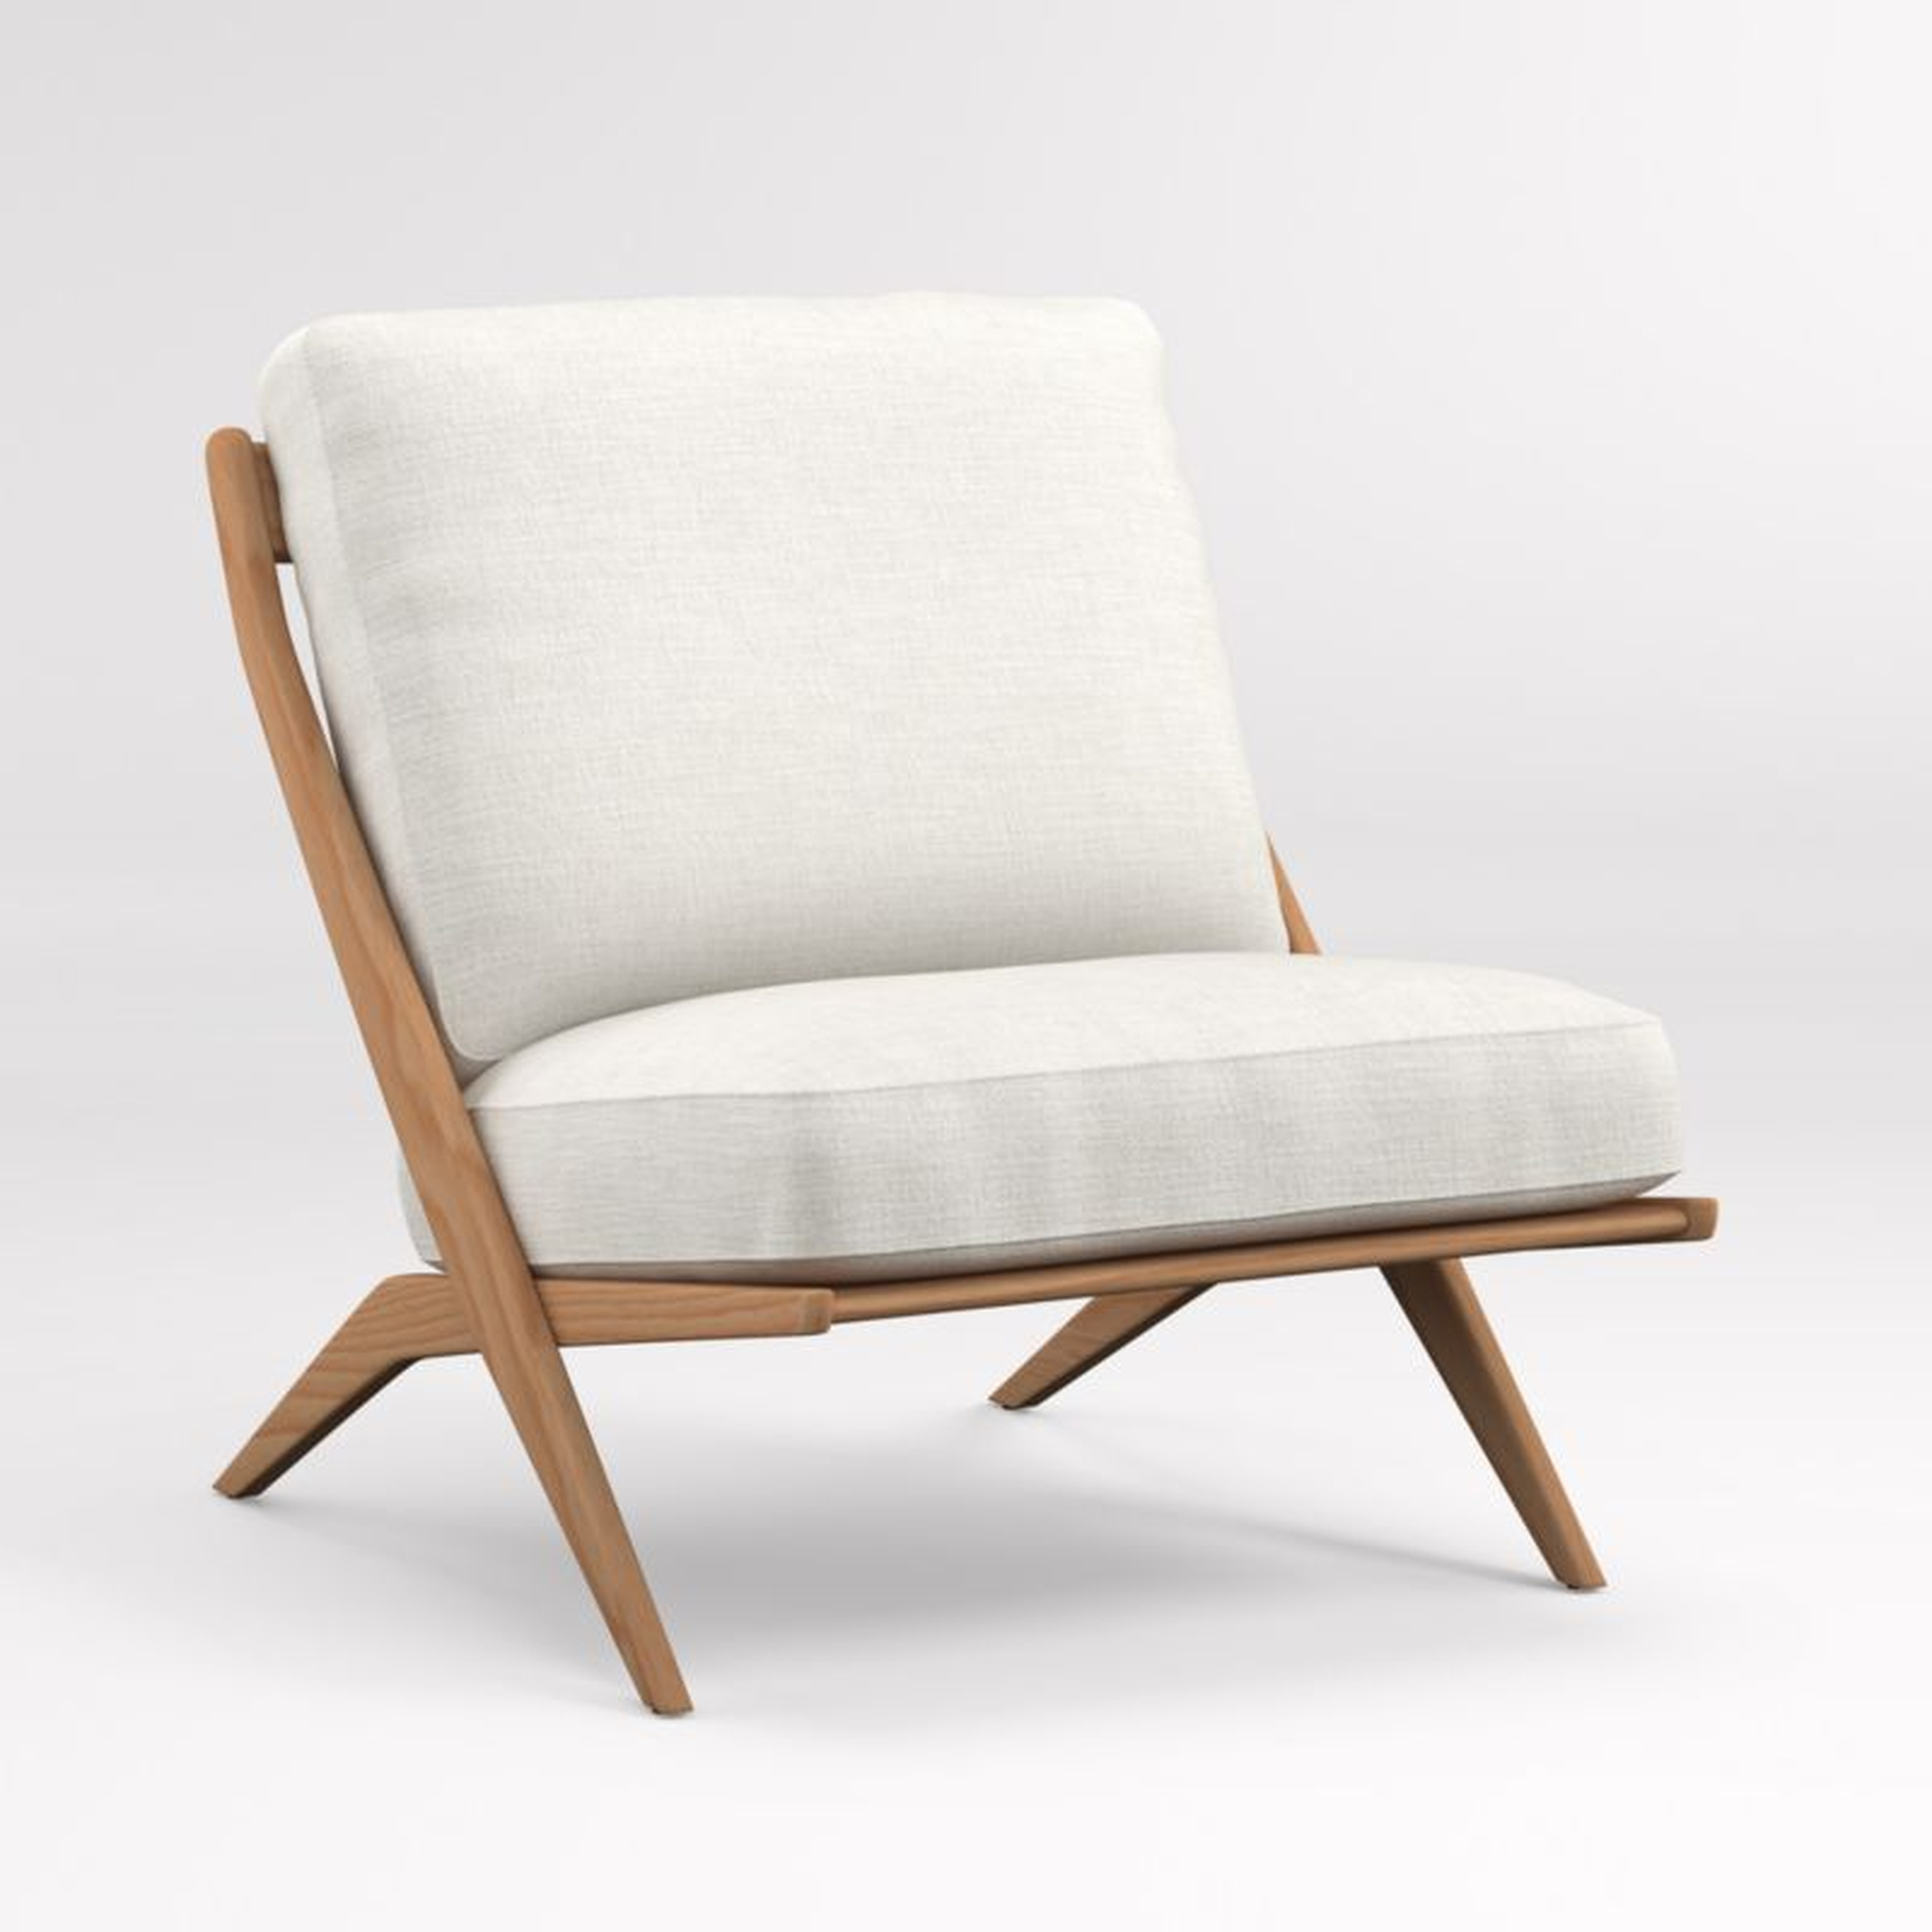 Pose Natural Accent Chair - Crate and Barrel